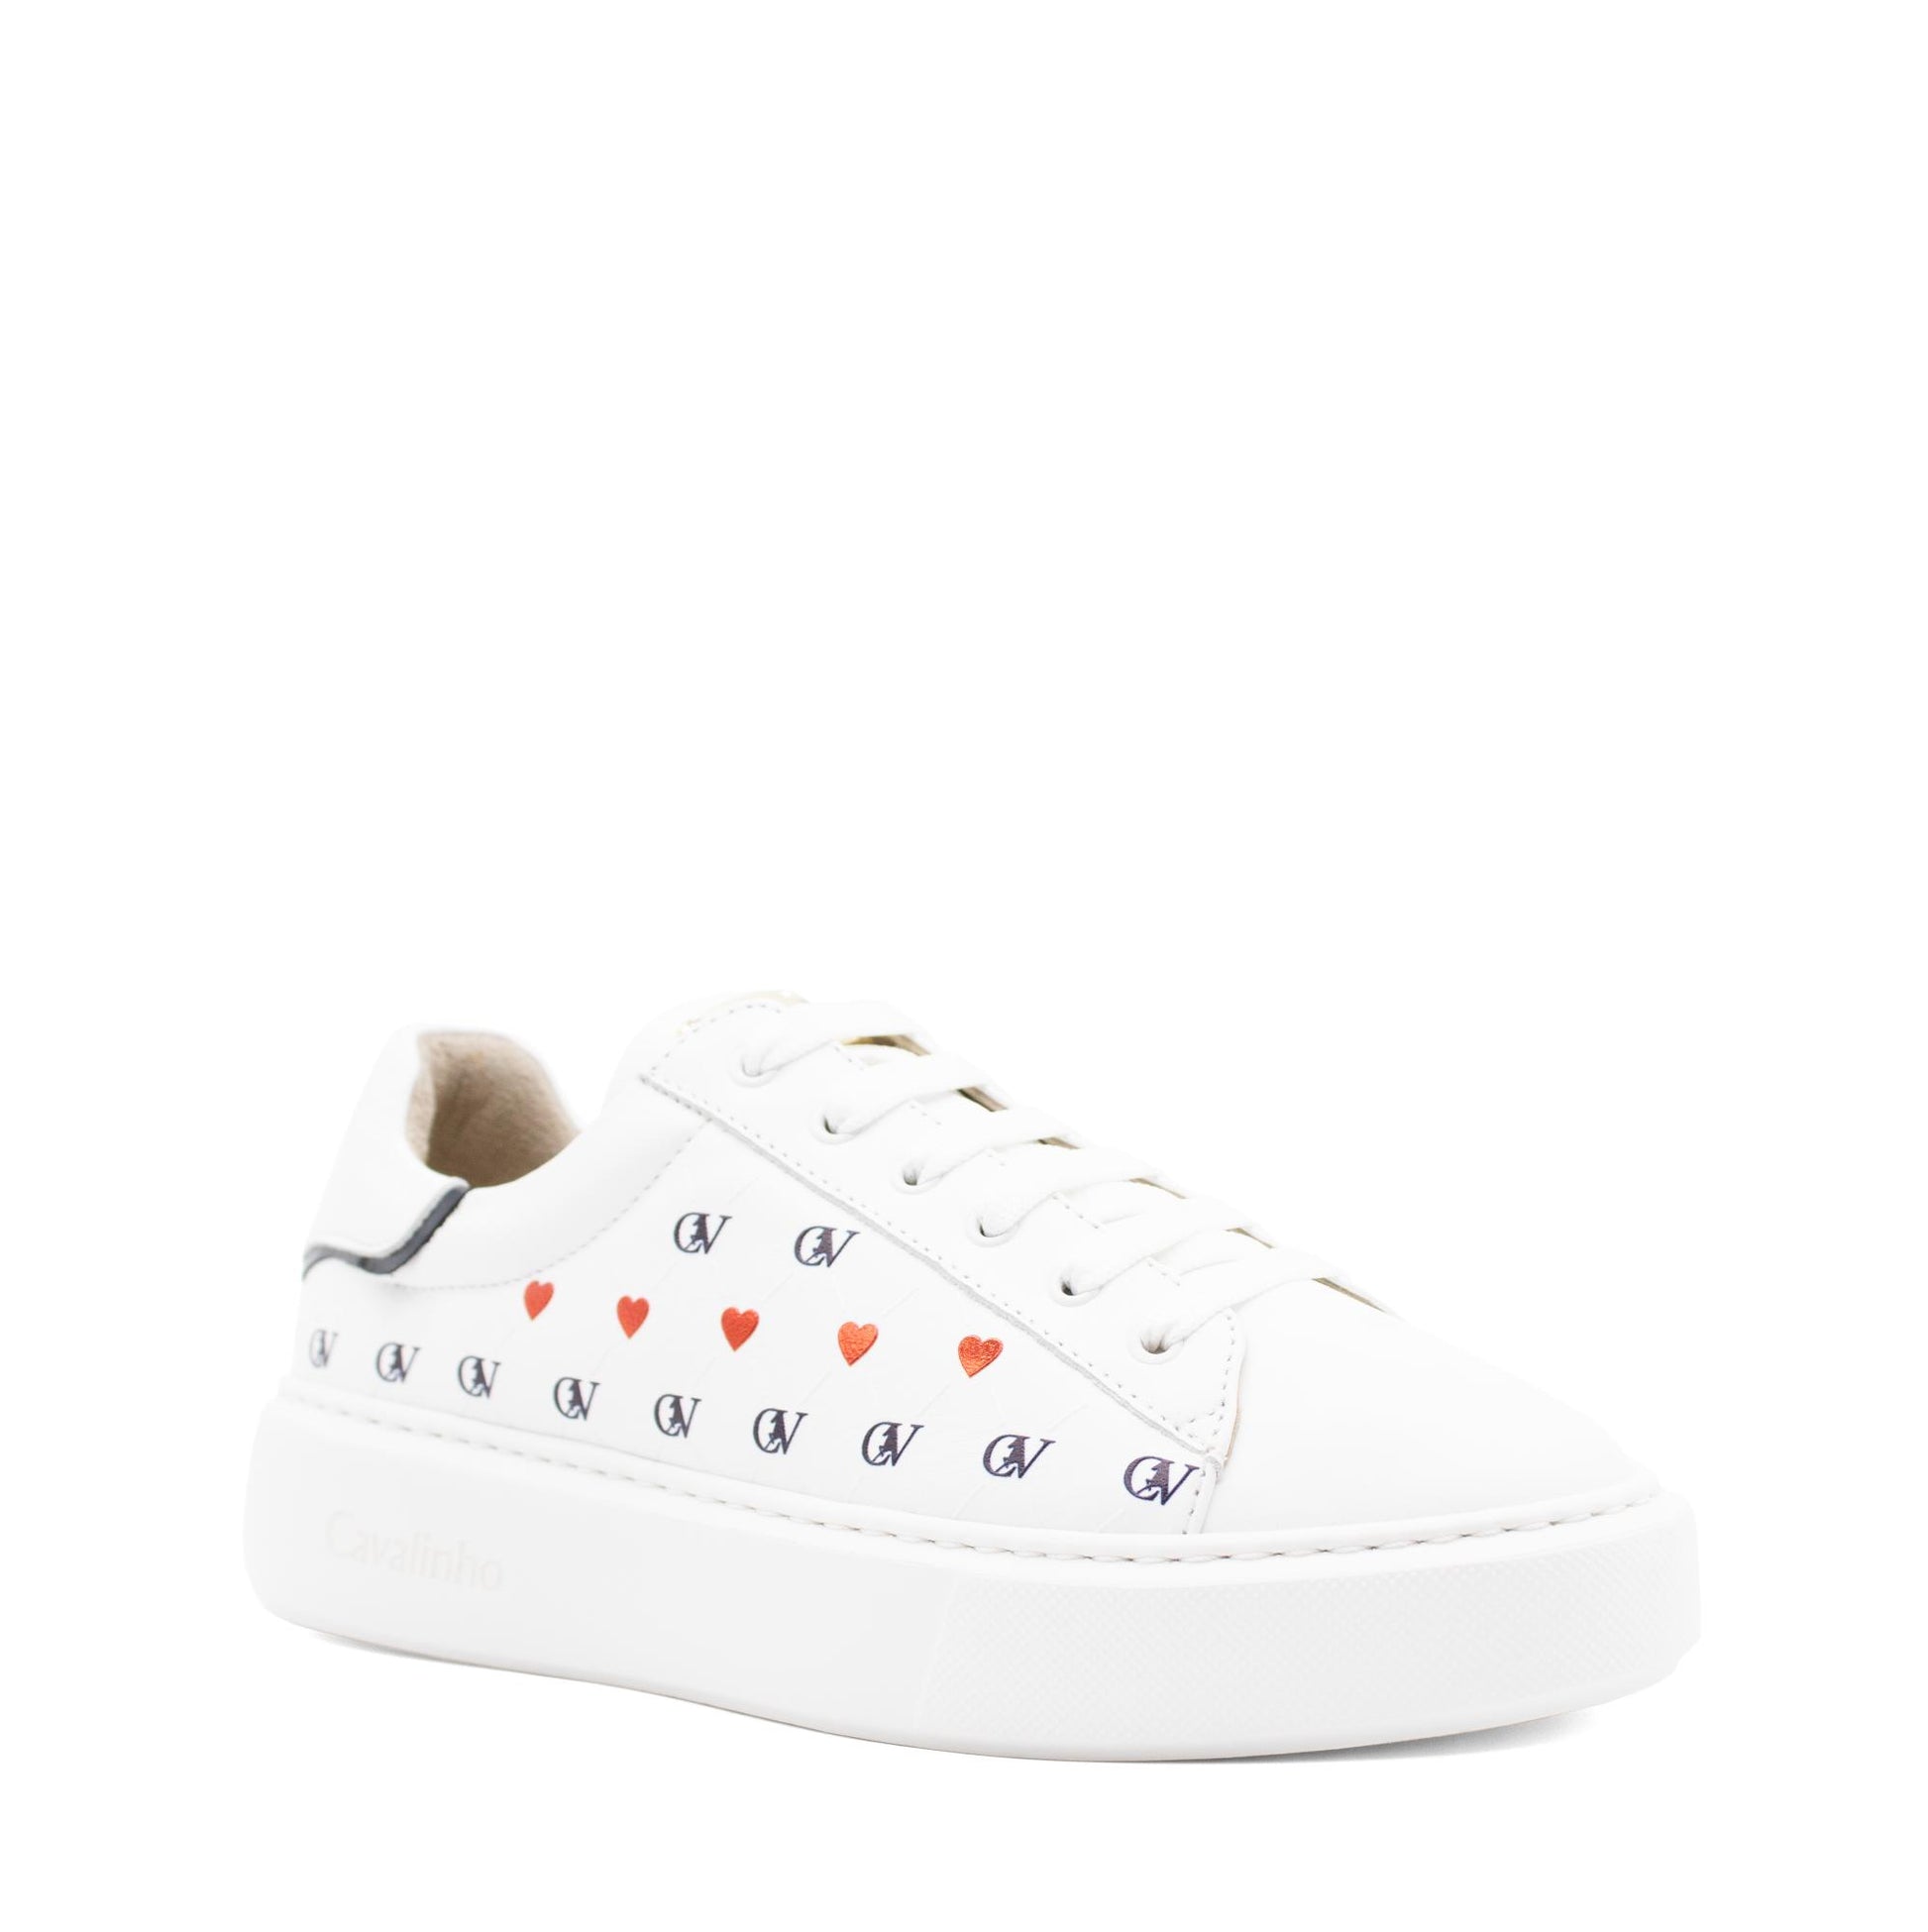 #color_ Navy White Red | Cavalinho Love Yourself Sneakers - Navy White Red - 48010108.22_2